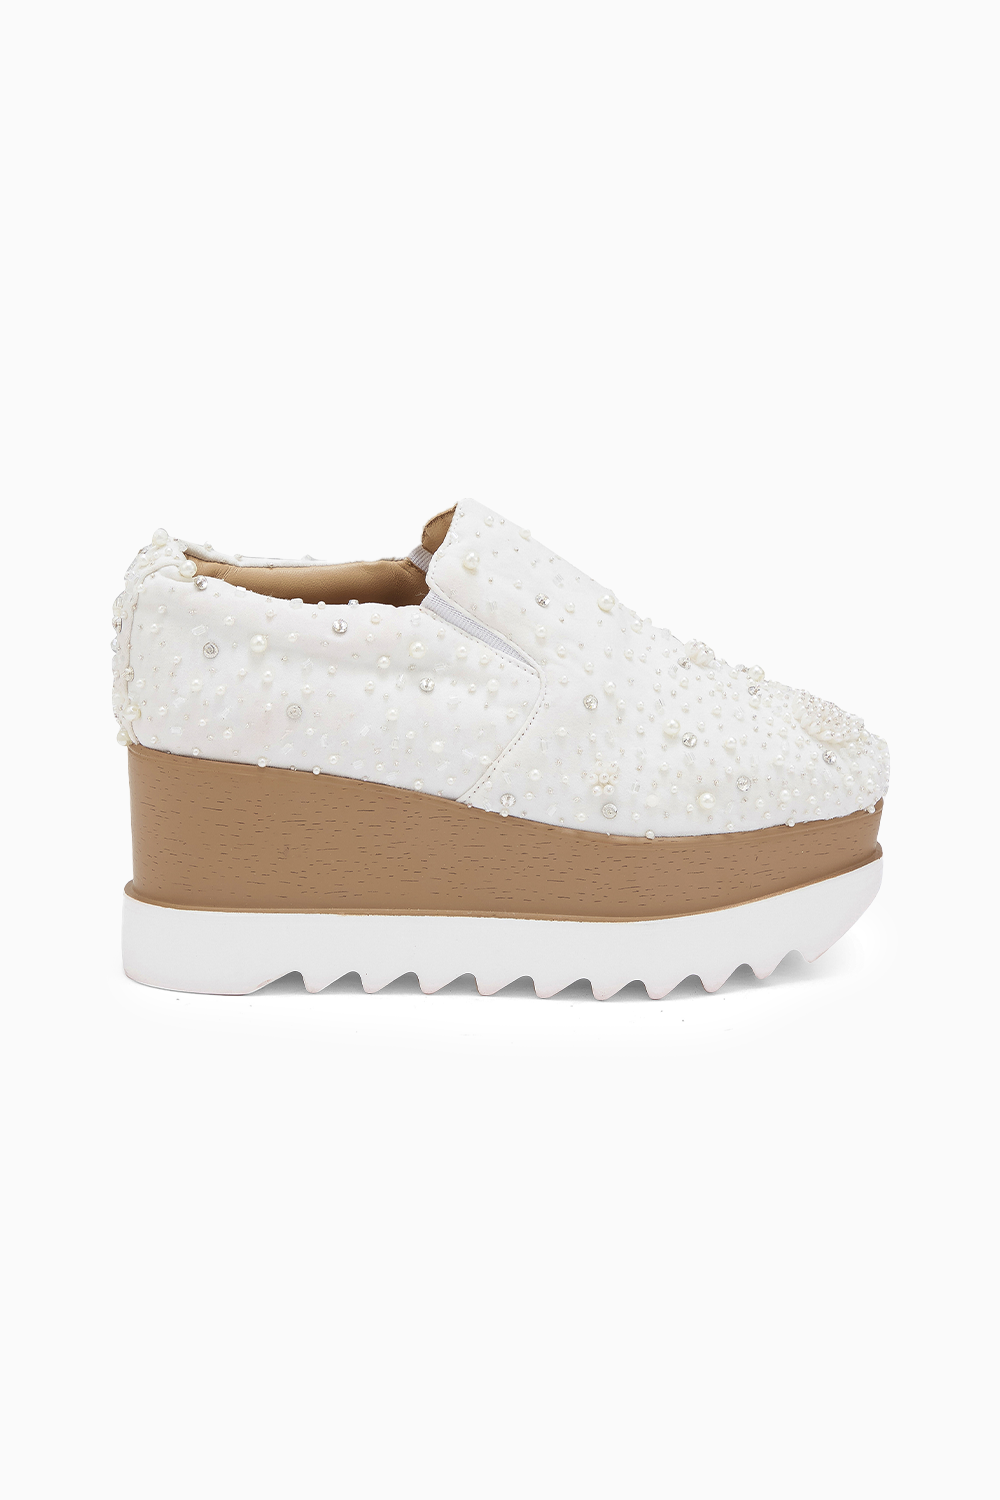 The Indian Fairy Wedding Wedge Sneakers